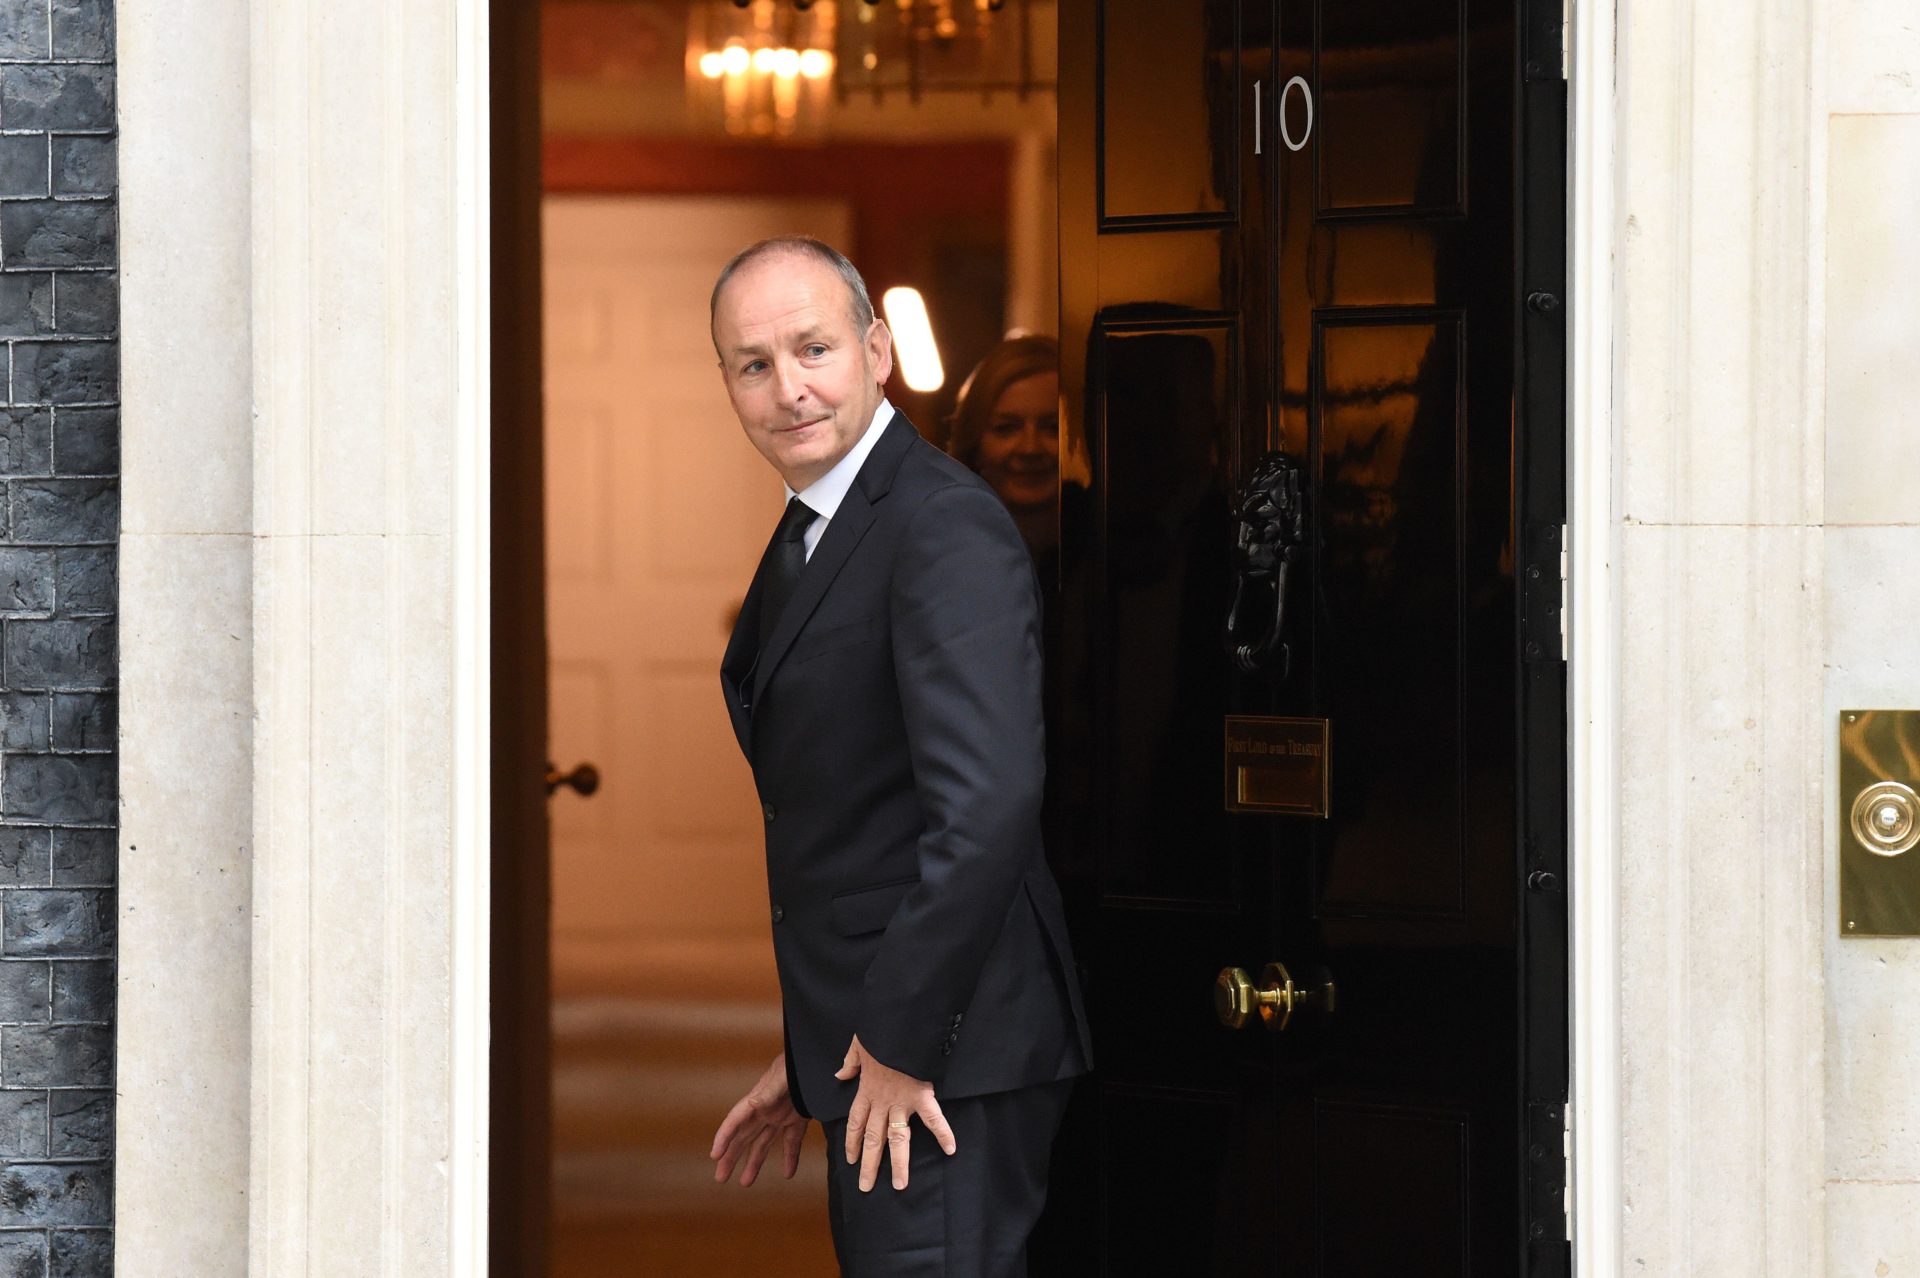 Taoiseach Micheál Martin arrives at Downing Street in London, England for a meeting with British Prime Minister Liz Truss.